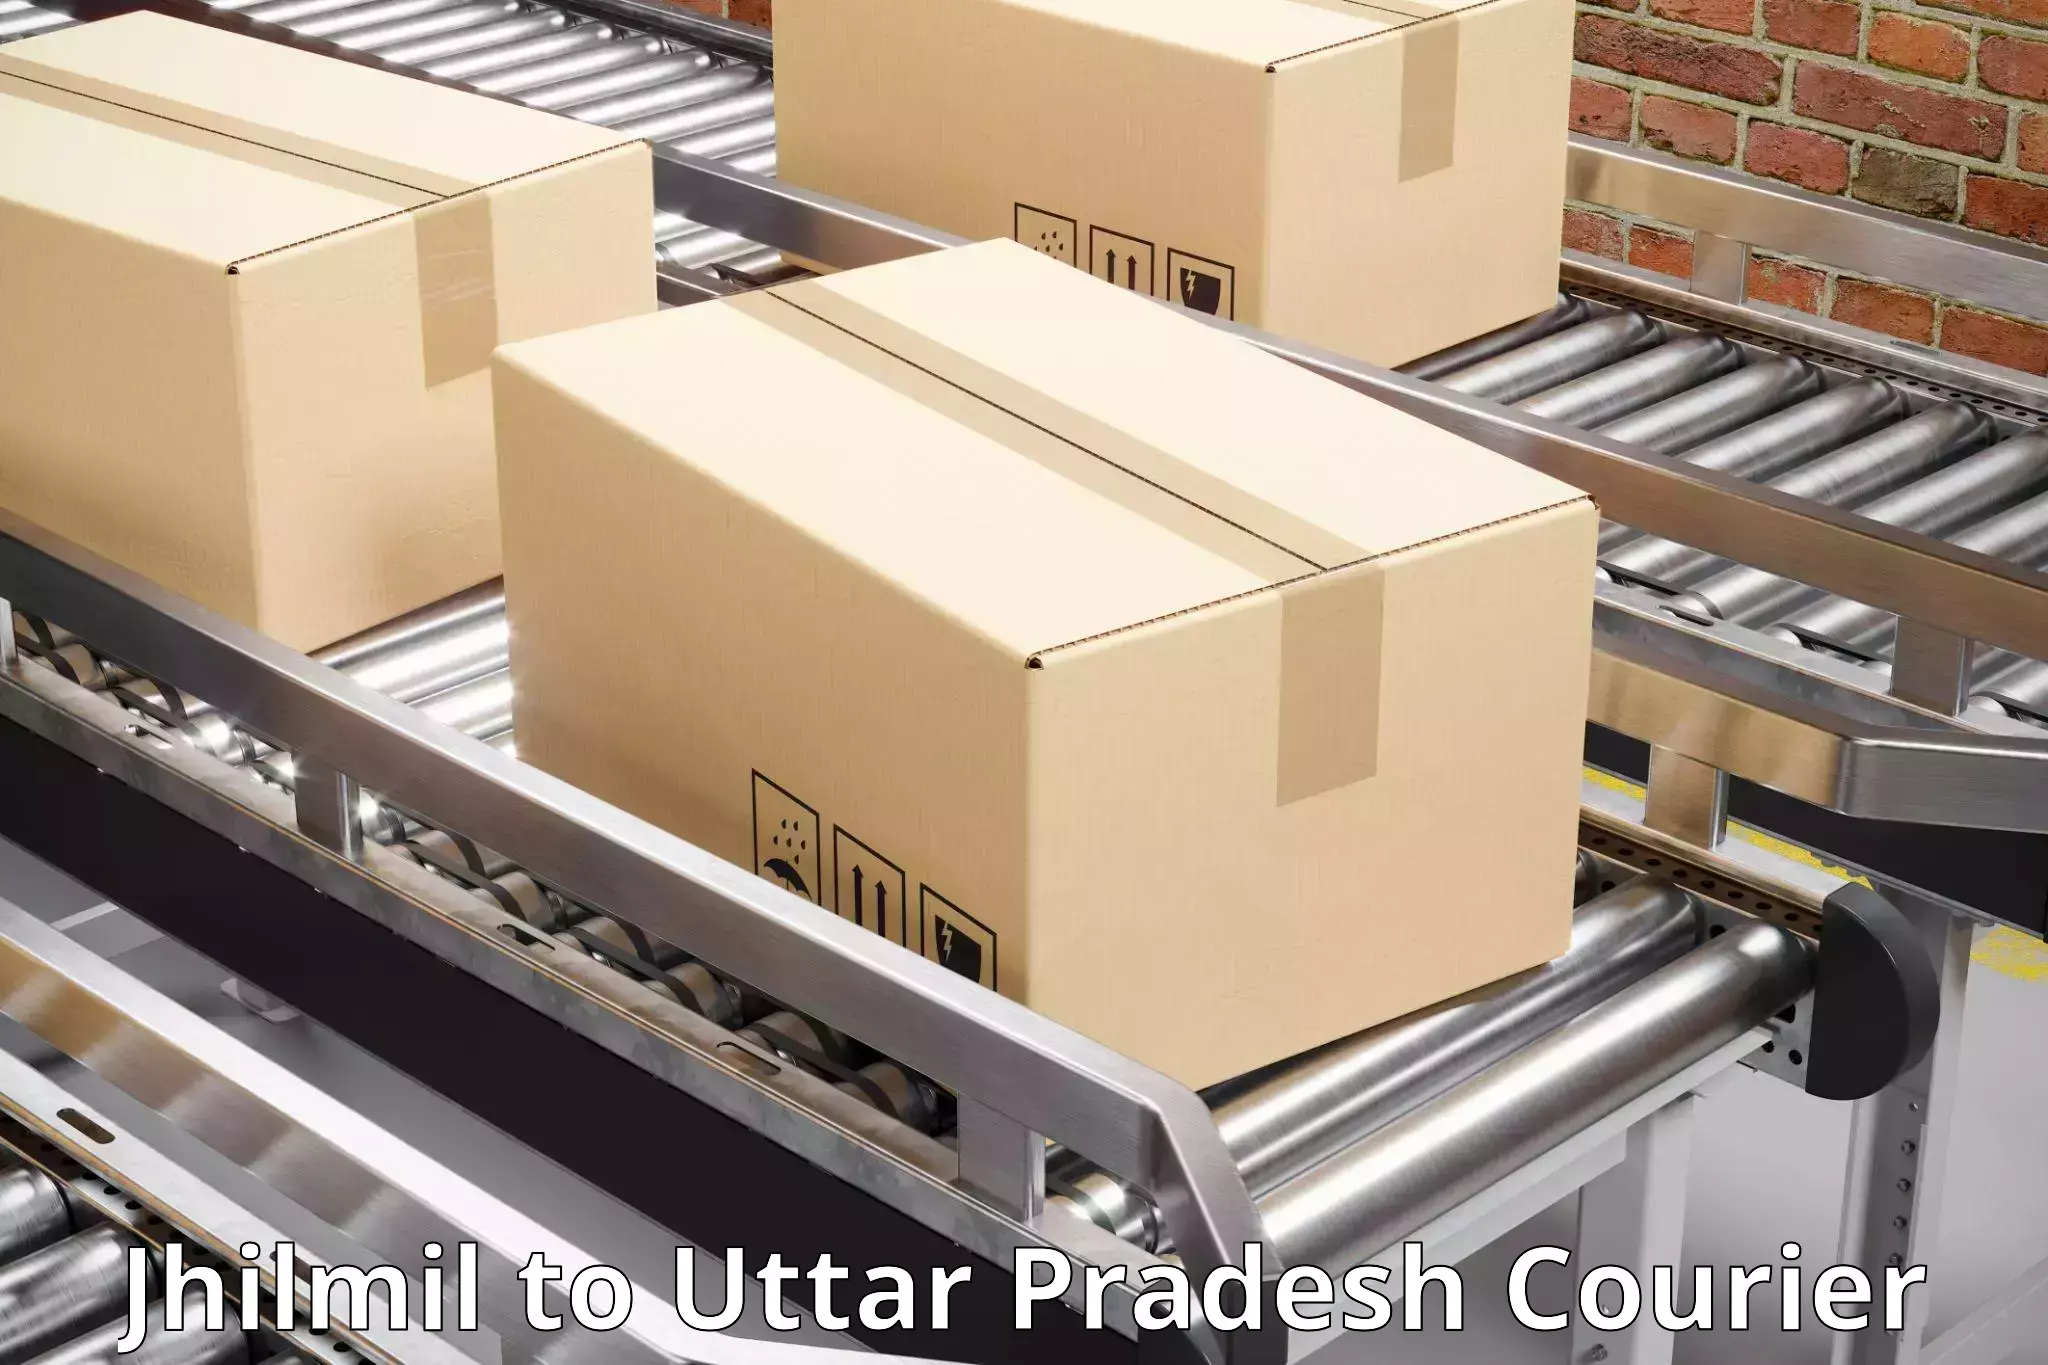 Easy access courier services Jhilmil to Dhaurahara